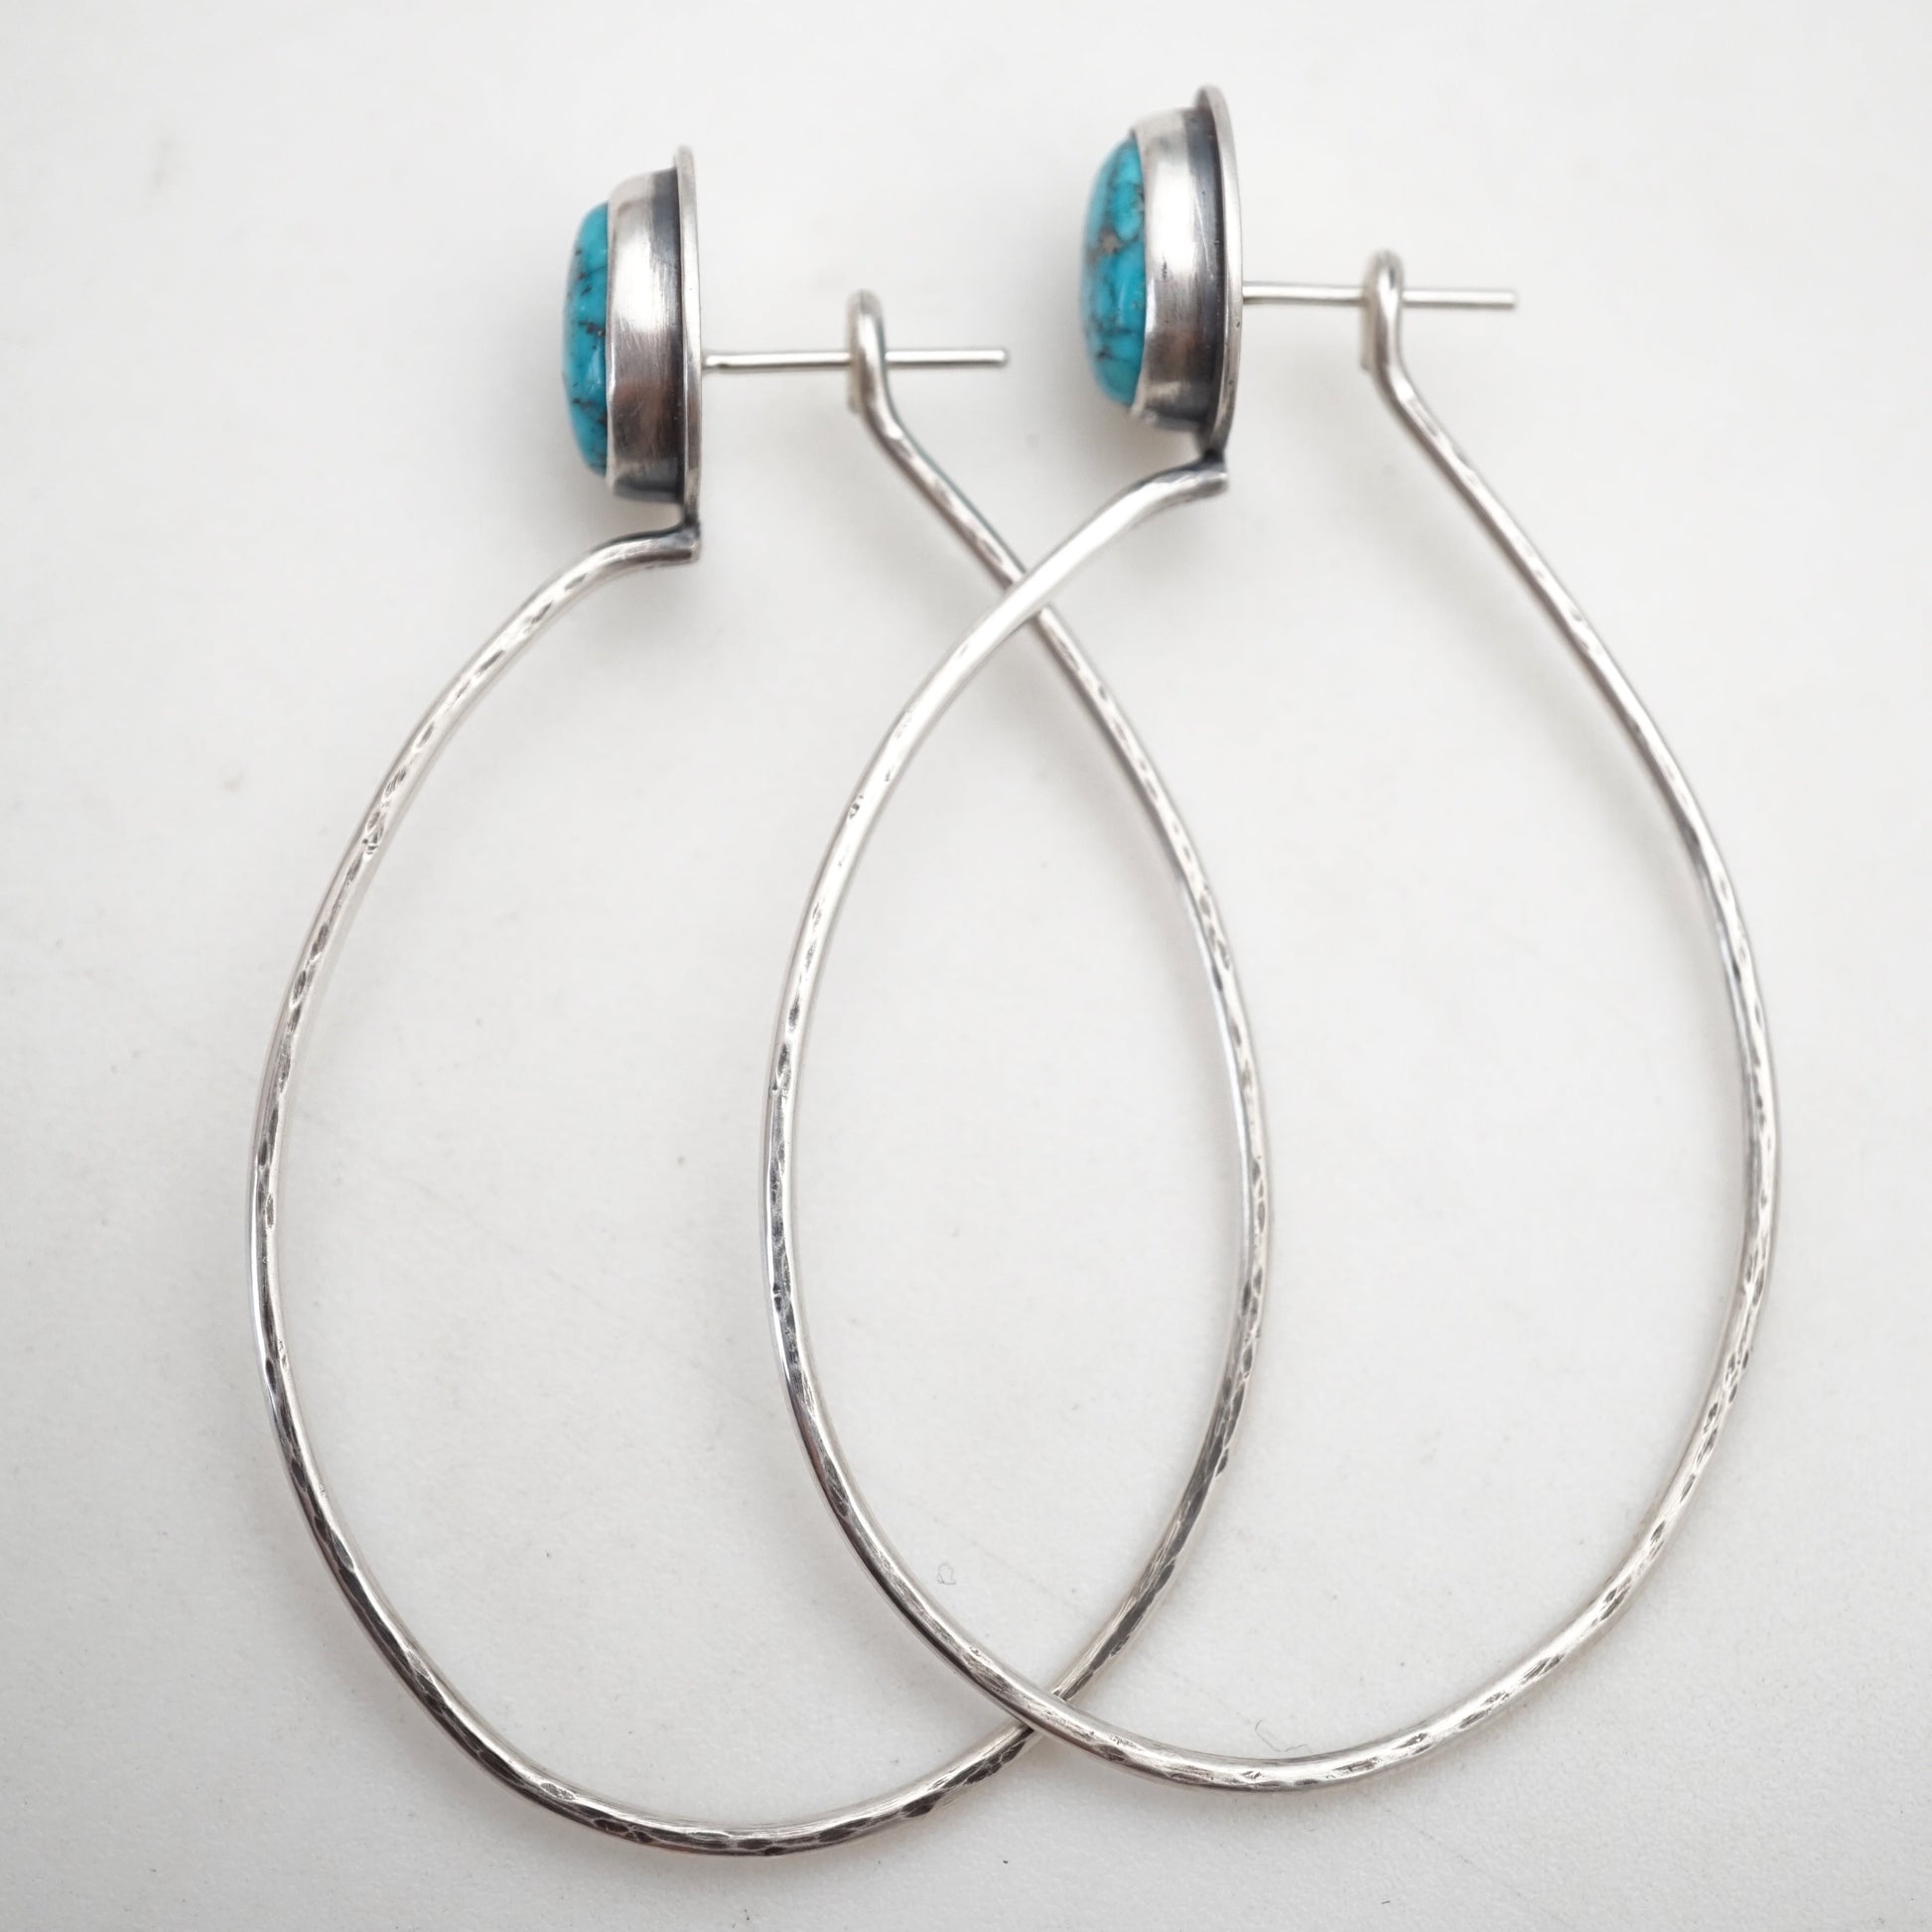 sonoran blue j turquoise + silver hoops - SMALL SIZE - Lumenrose